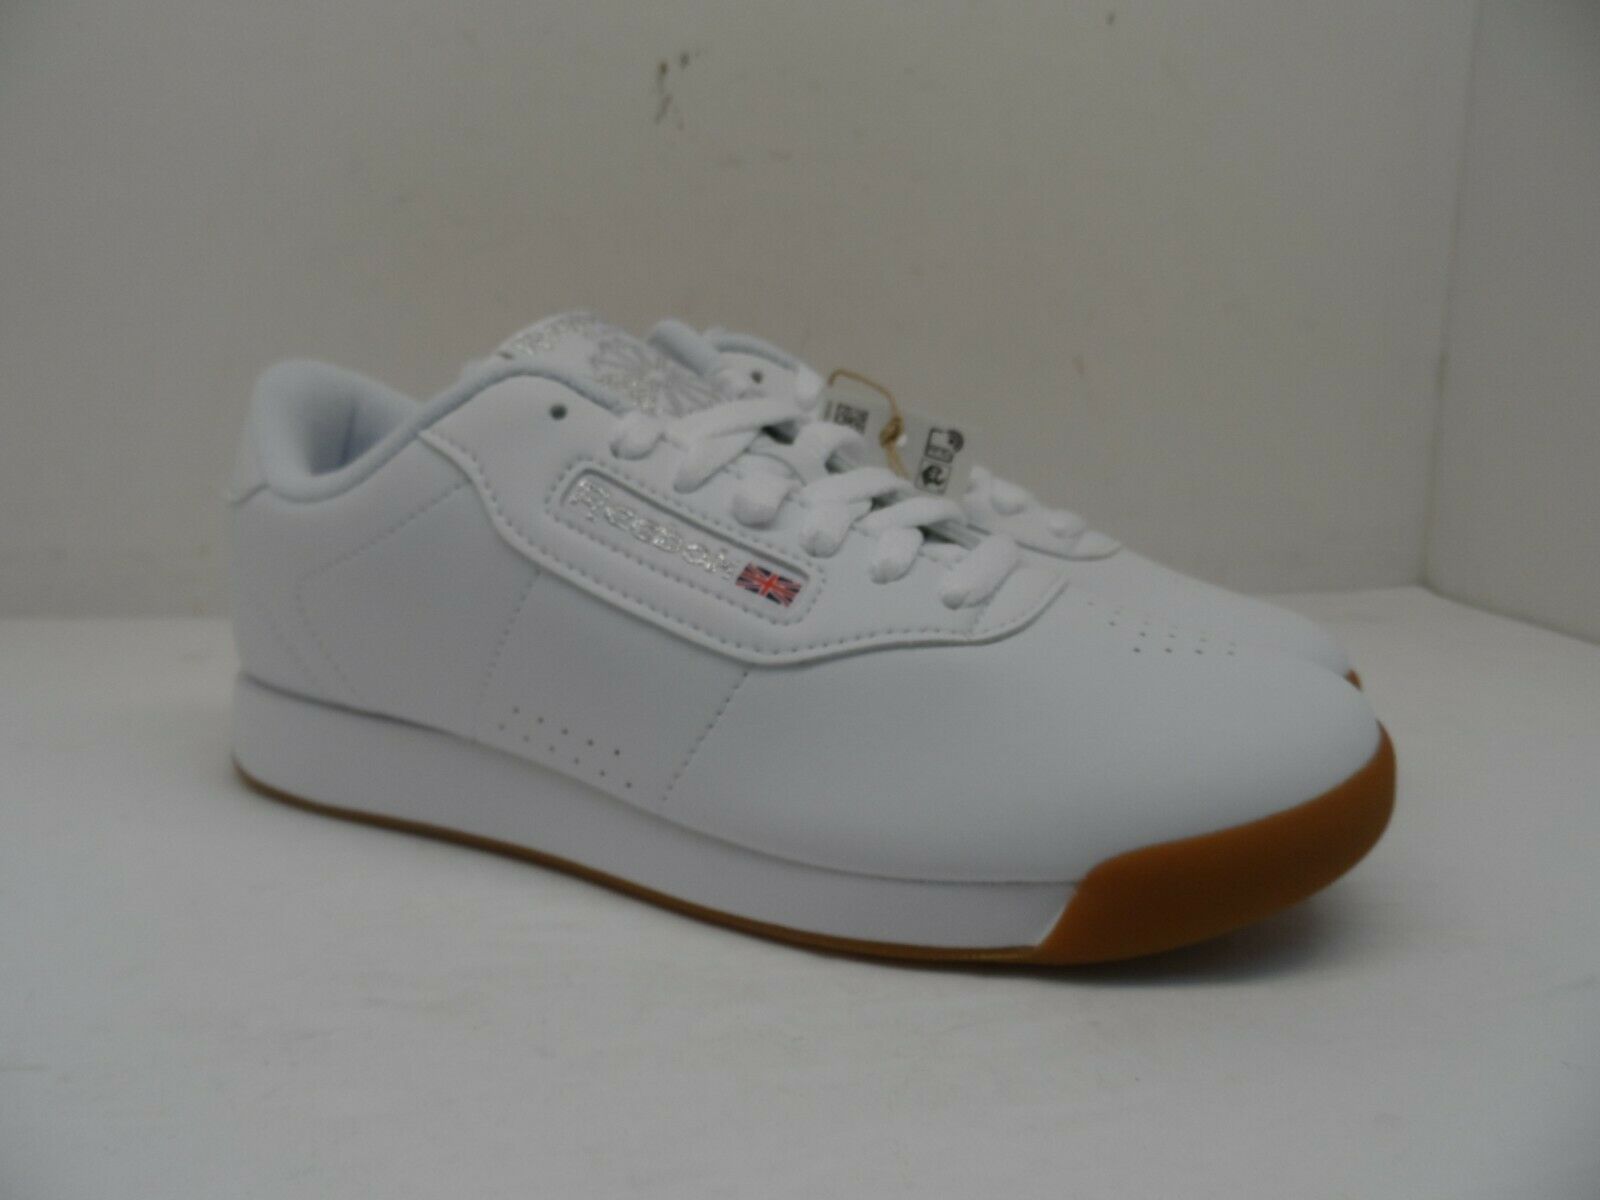 Primary image for Reebok Women's Princess Casual Athletic Shoes BS8458 White/Gum Size 7.5M